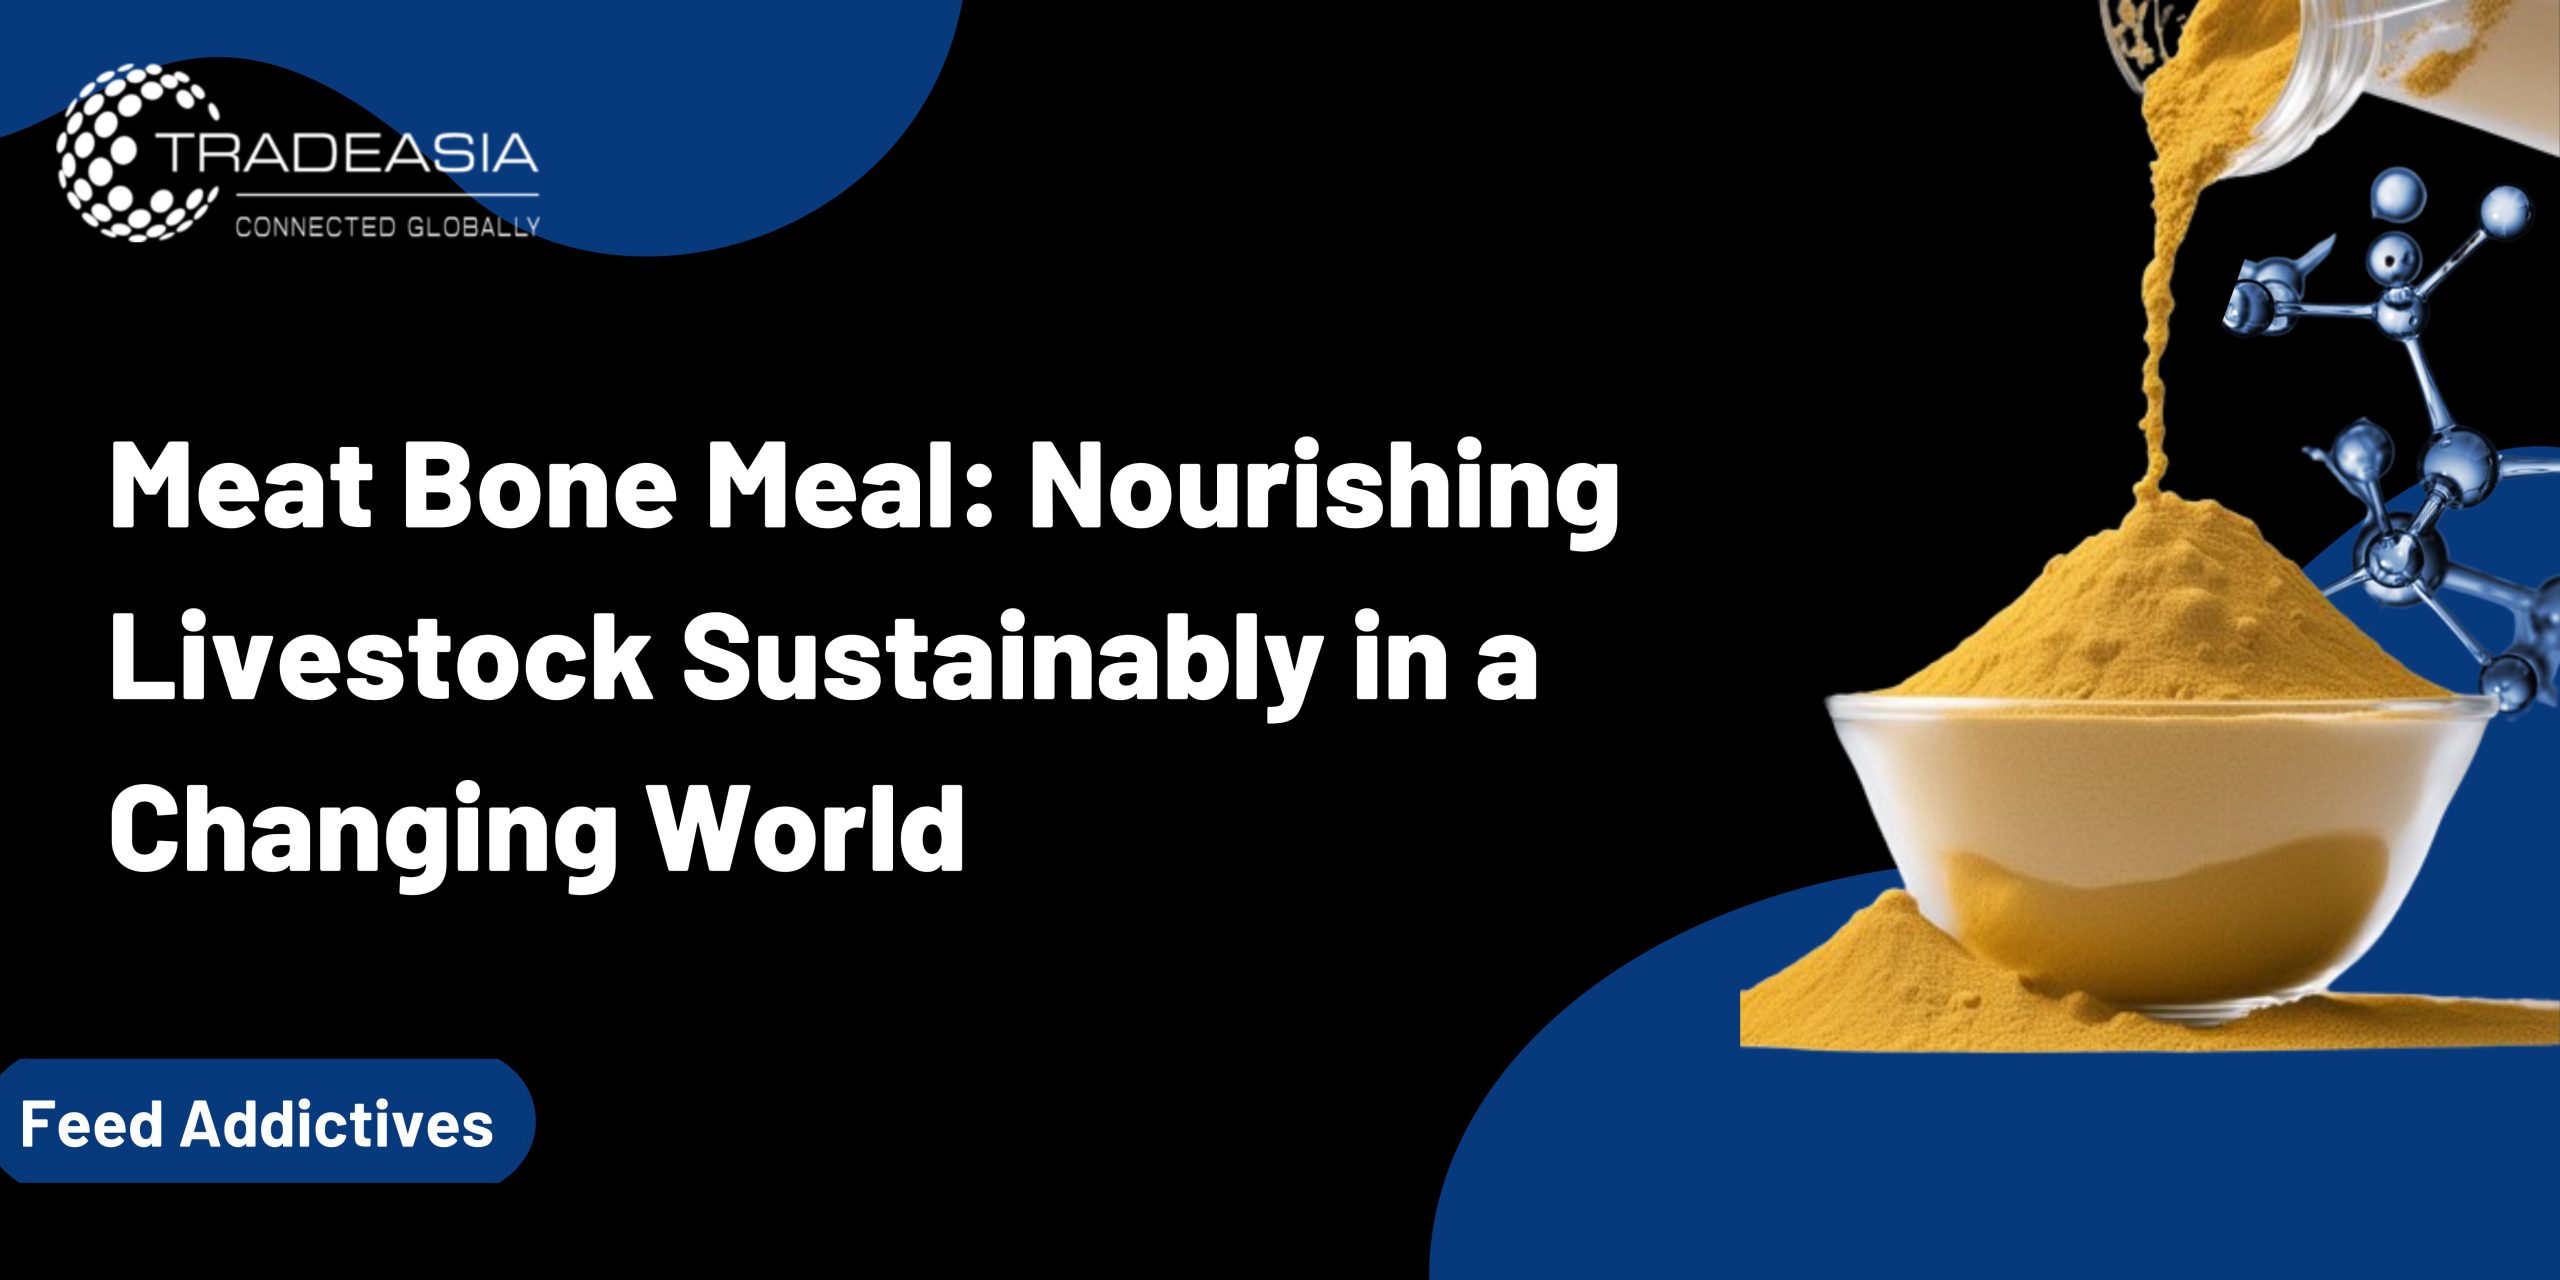 Meat Bone Meal: Nourishing Livestock Sustainably in a Changing World